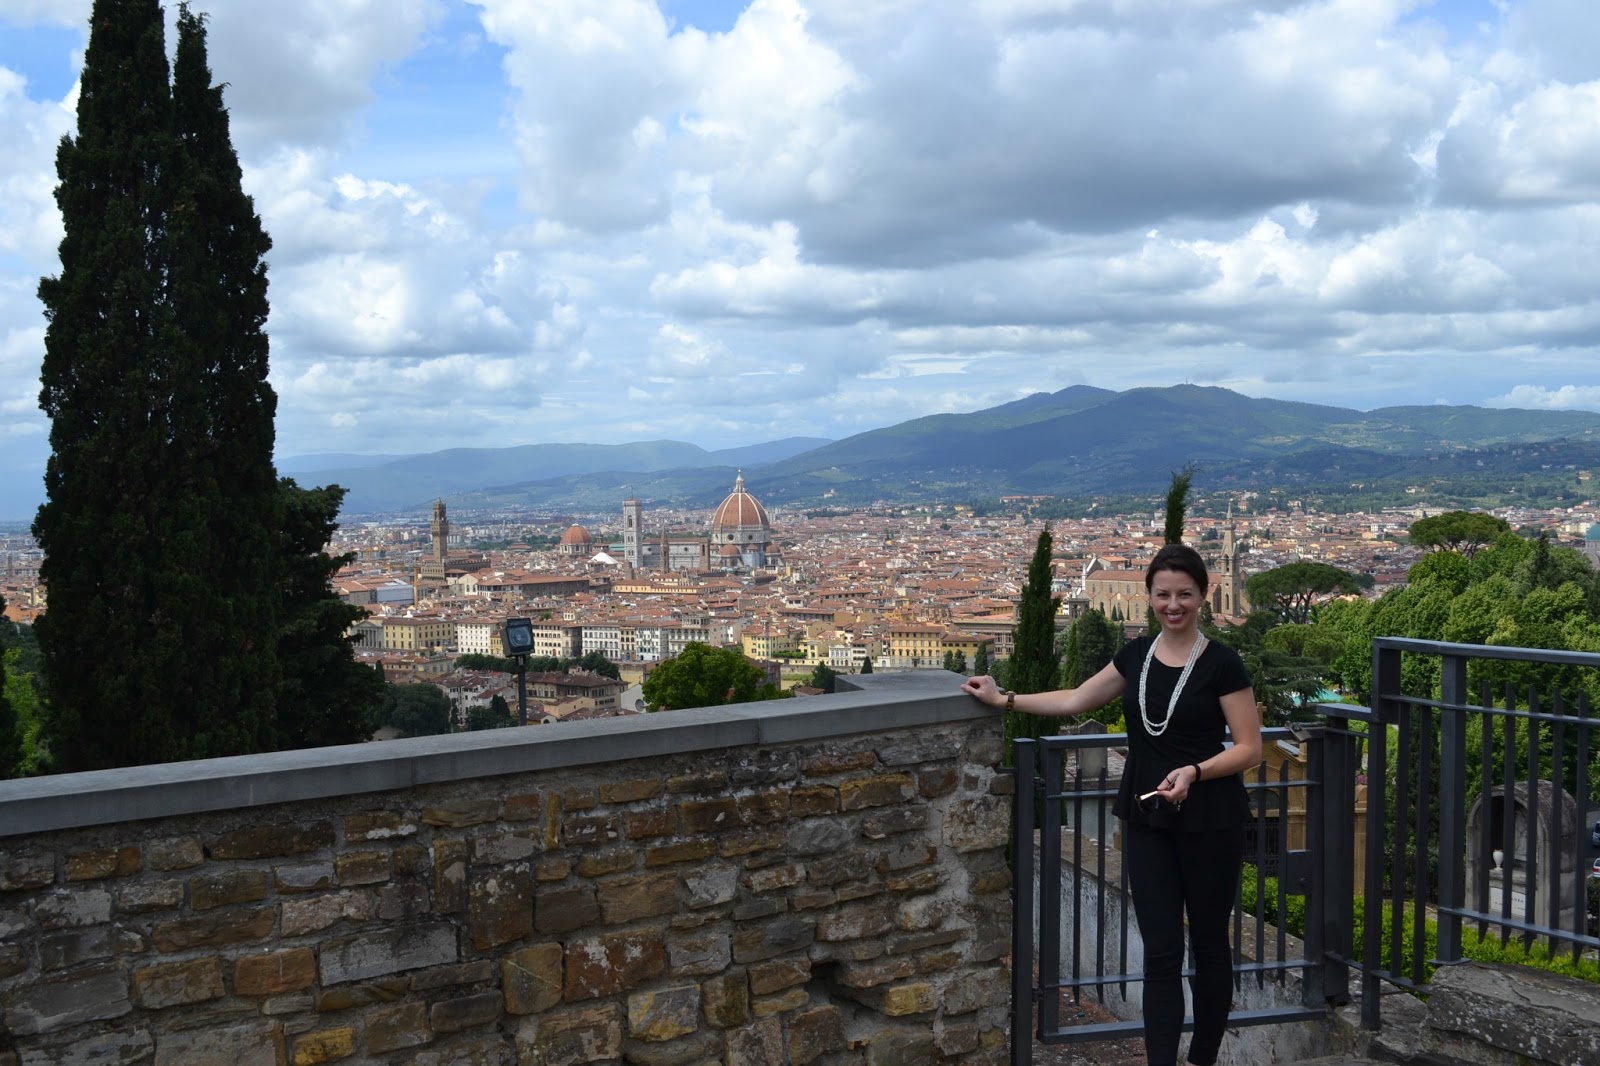 SMIDGE OF THIS: Two Nights In Firenze